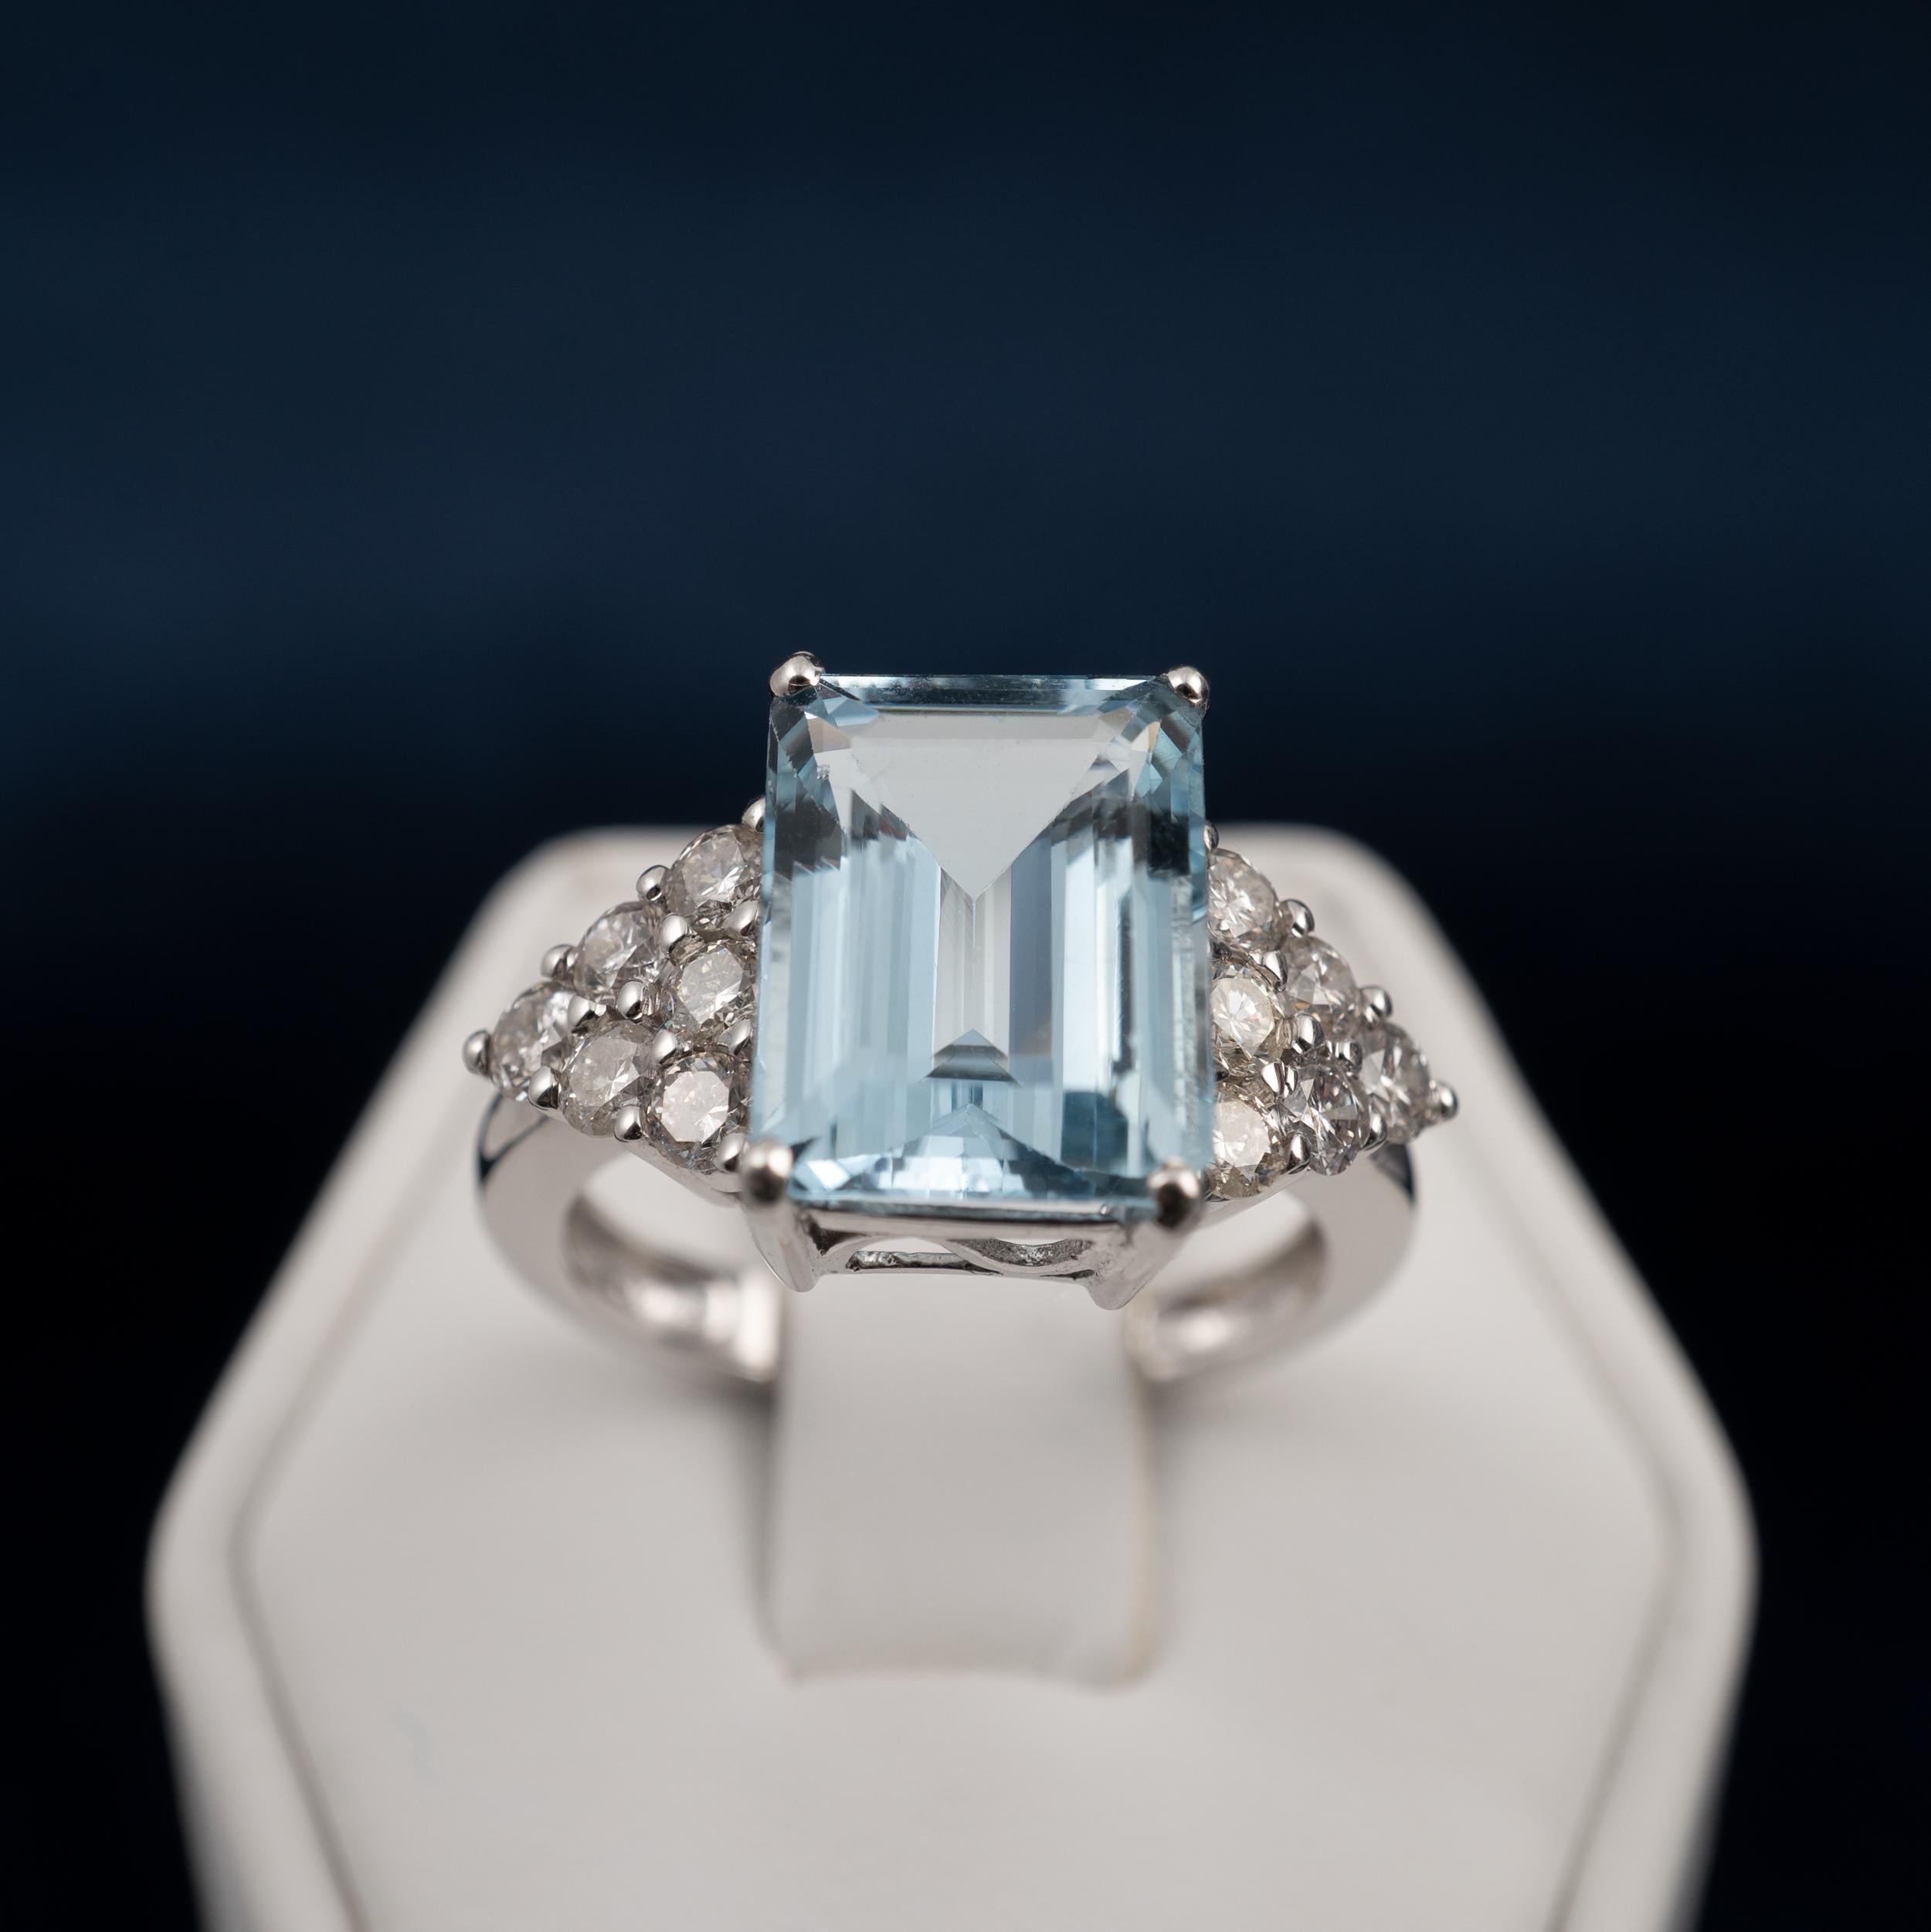 An impressive 5-carat aquamarine and diamond statement ring is made in 18 karat white gold and features a rare loop clear natural aquamarine gemstone.

Crafted by our expert artisan jewelers, this mesmerizing ring features an octagon step cut